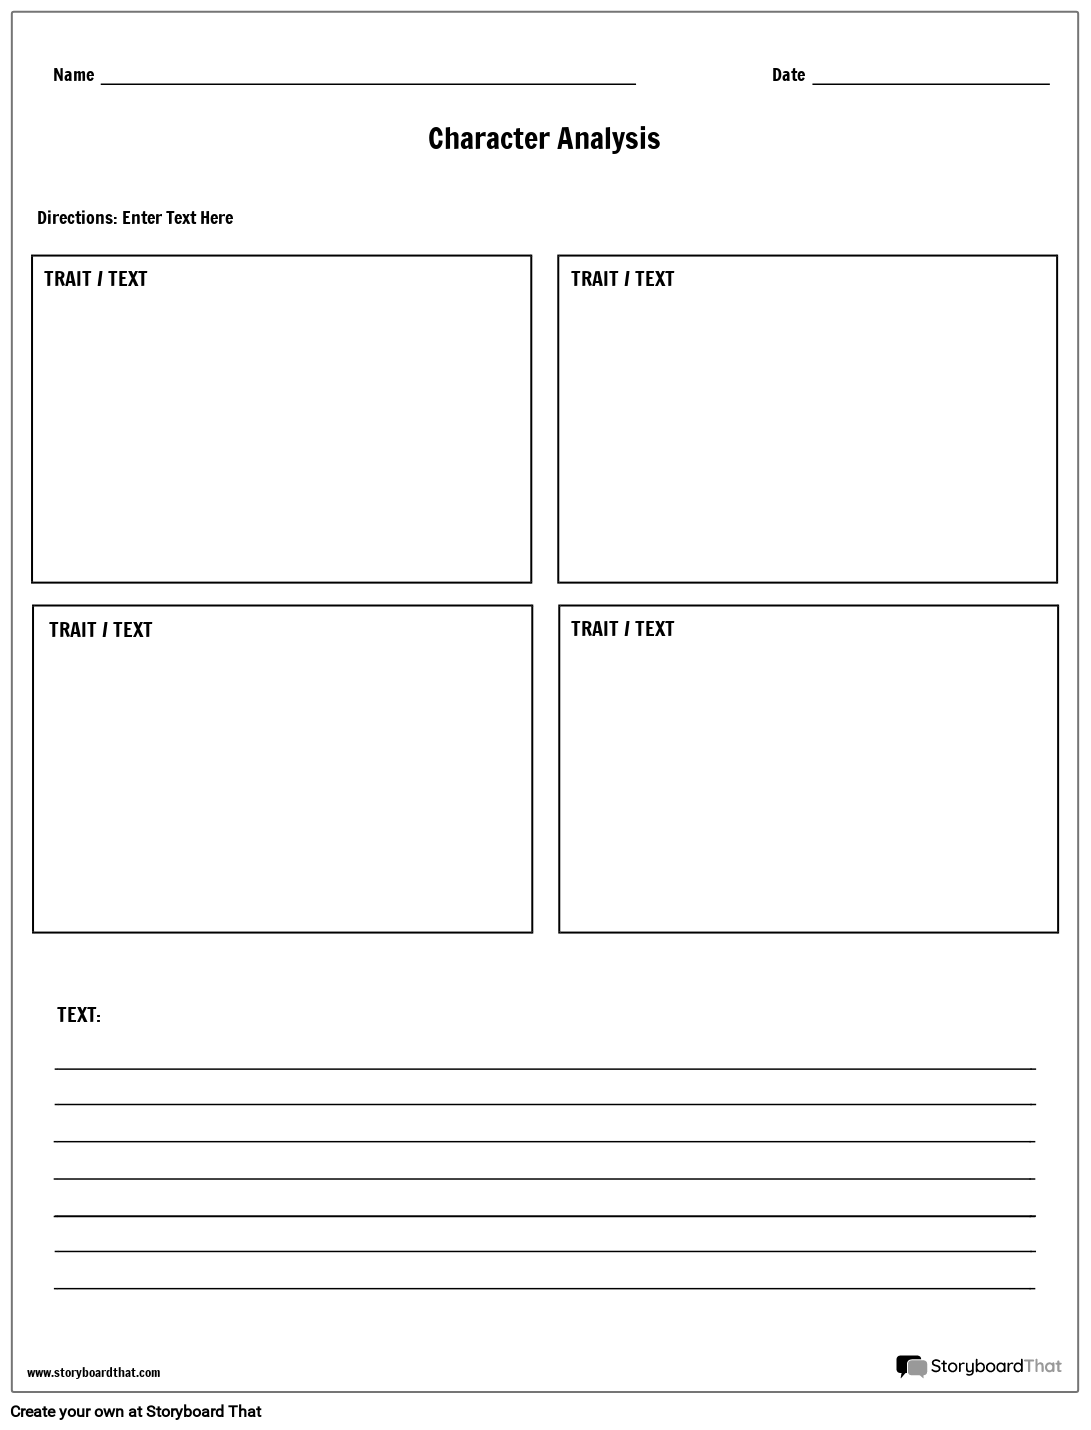 character-analysis-worksheets-character-analysis-essay-storyboardthat